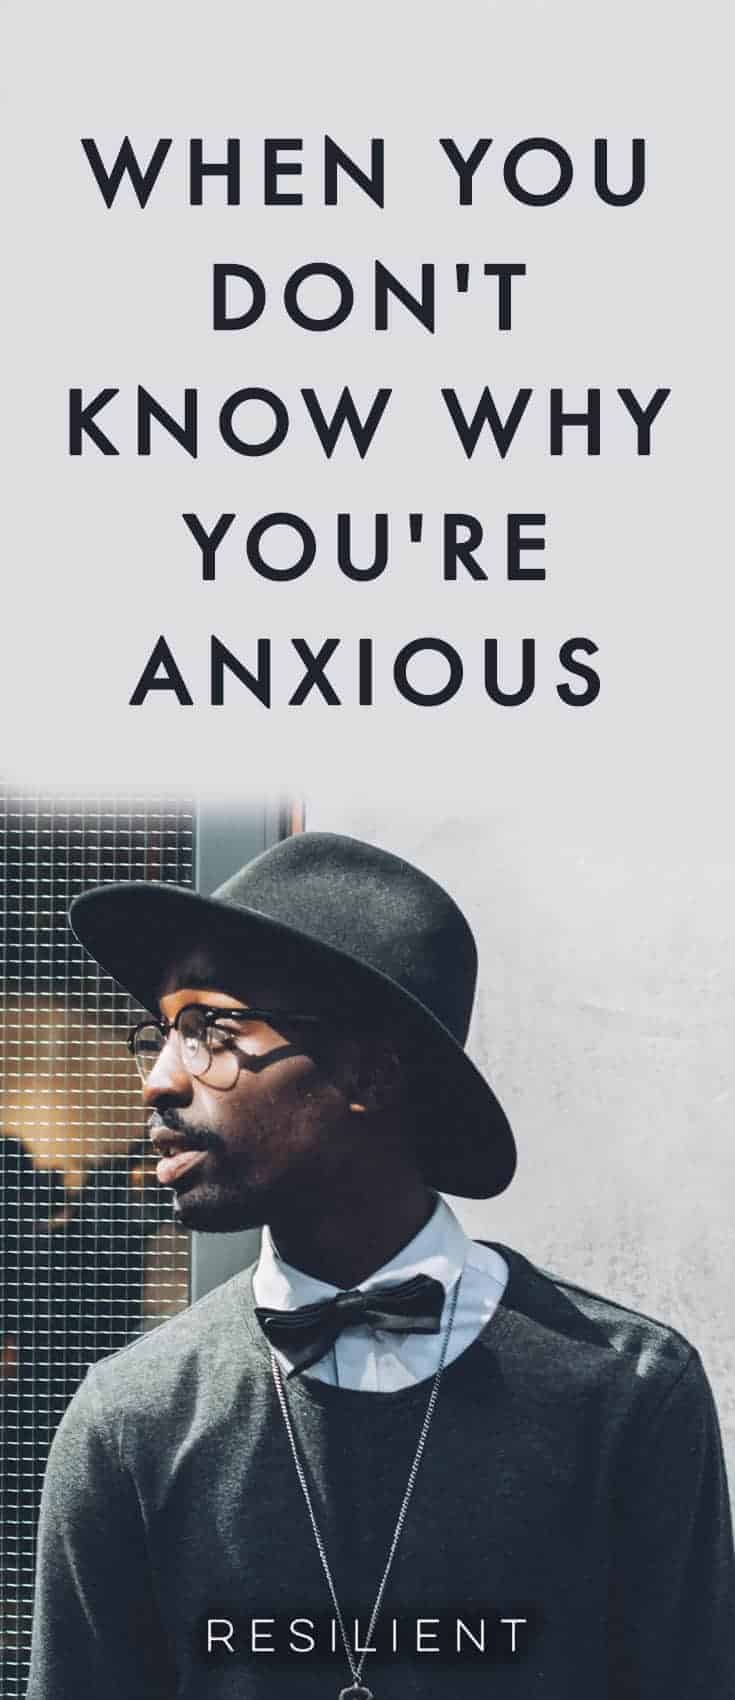 Sometimes you just don't know why you're anxious.  It seems like things are going pretty well in your life (or at least there aren't any noticeable bumps in the road), but still, you feel a little anxious all the time.  Here's what to do when you don't know why you're anxious.